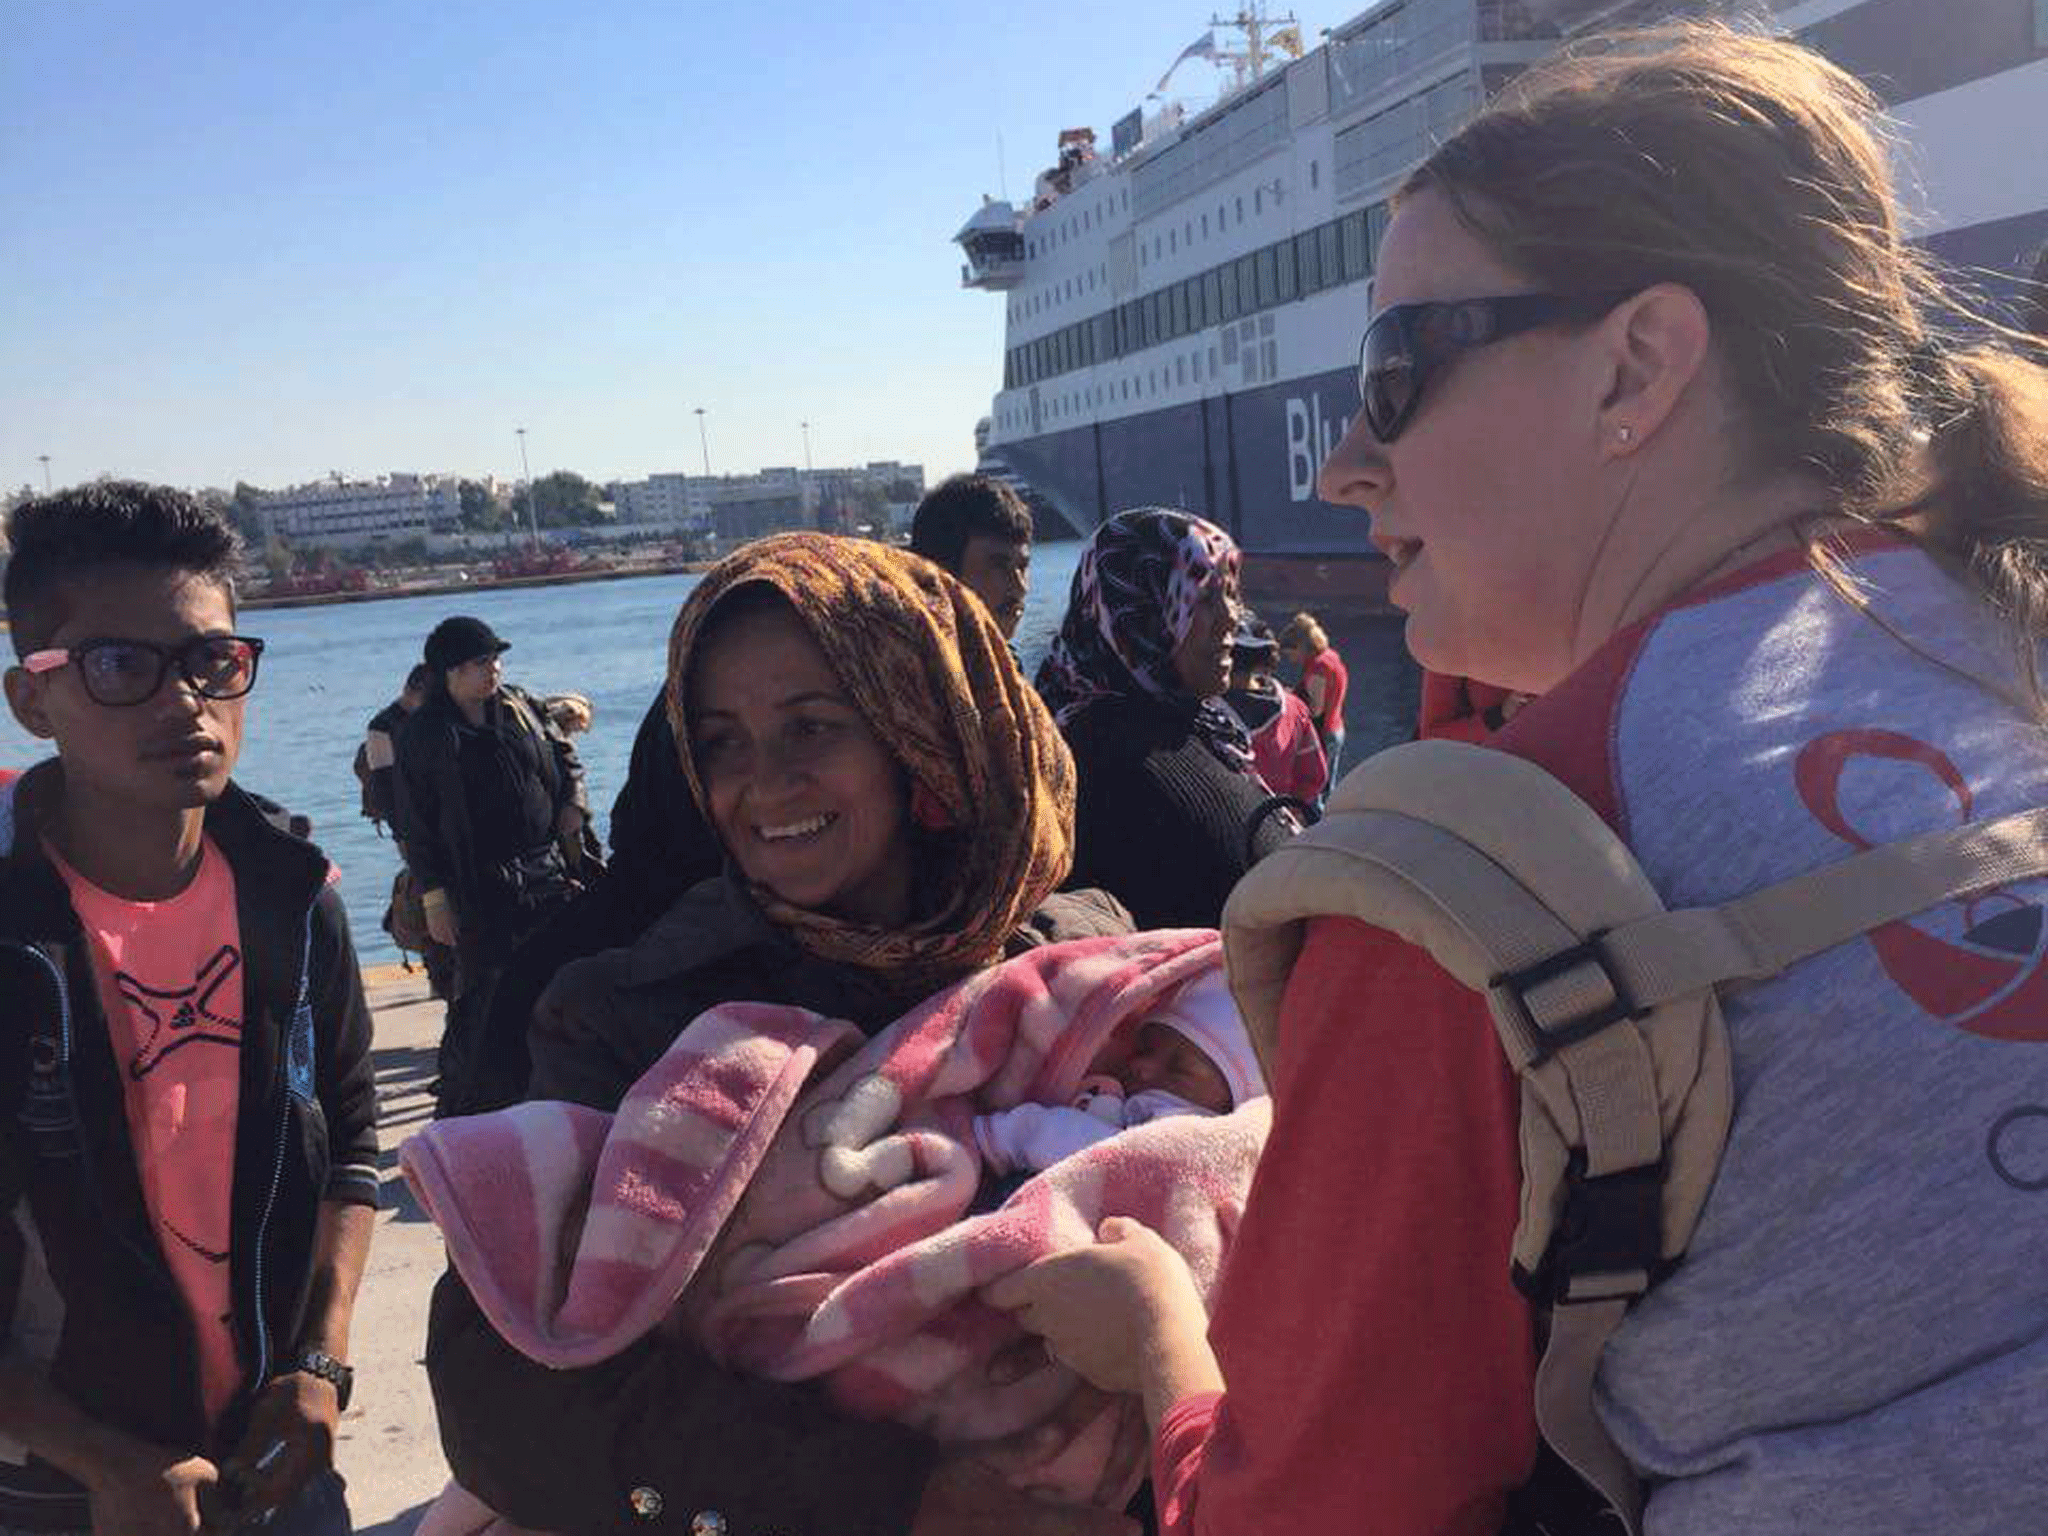 Volunteers are handing out baby carriers at refugee camps in Greece 